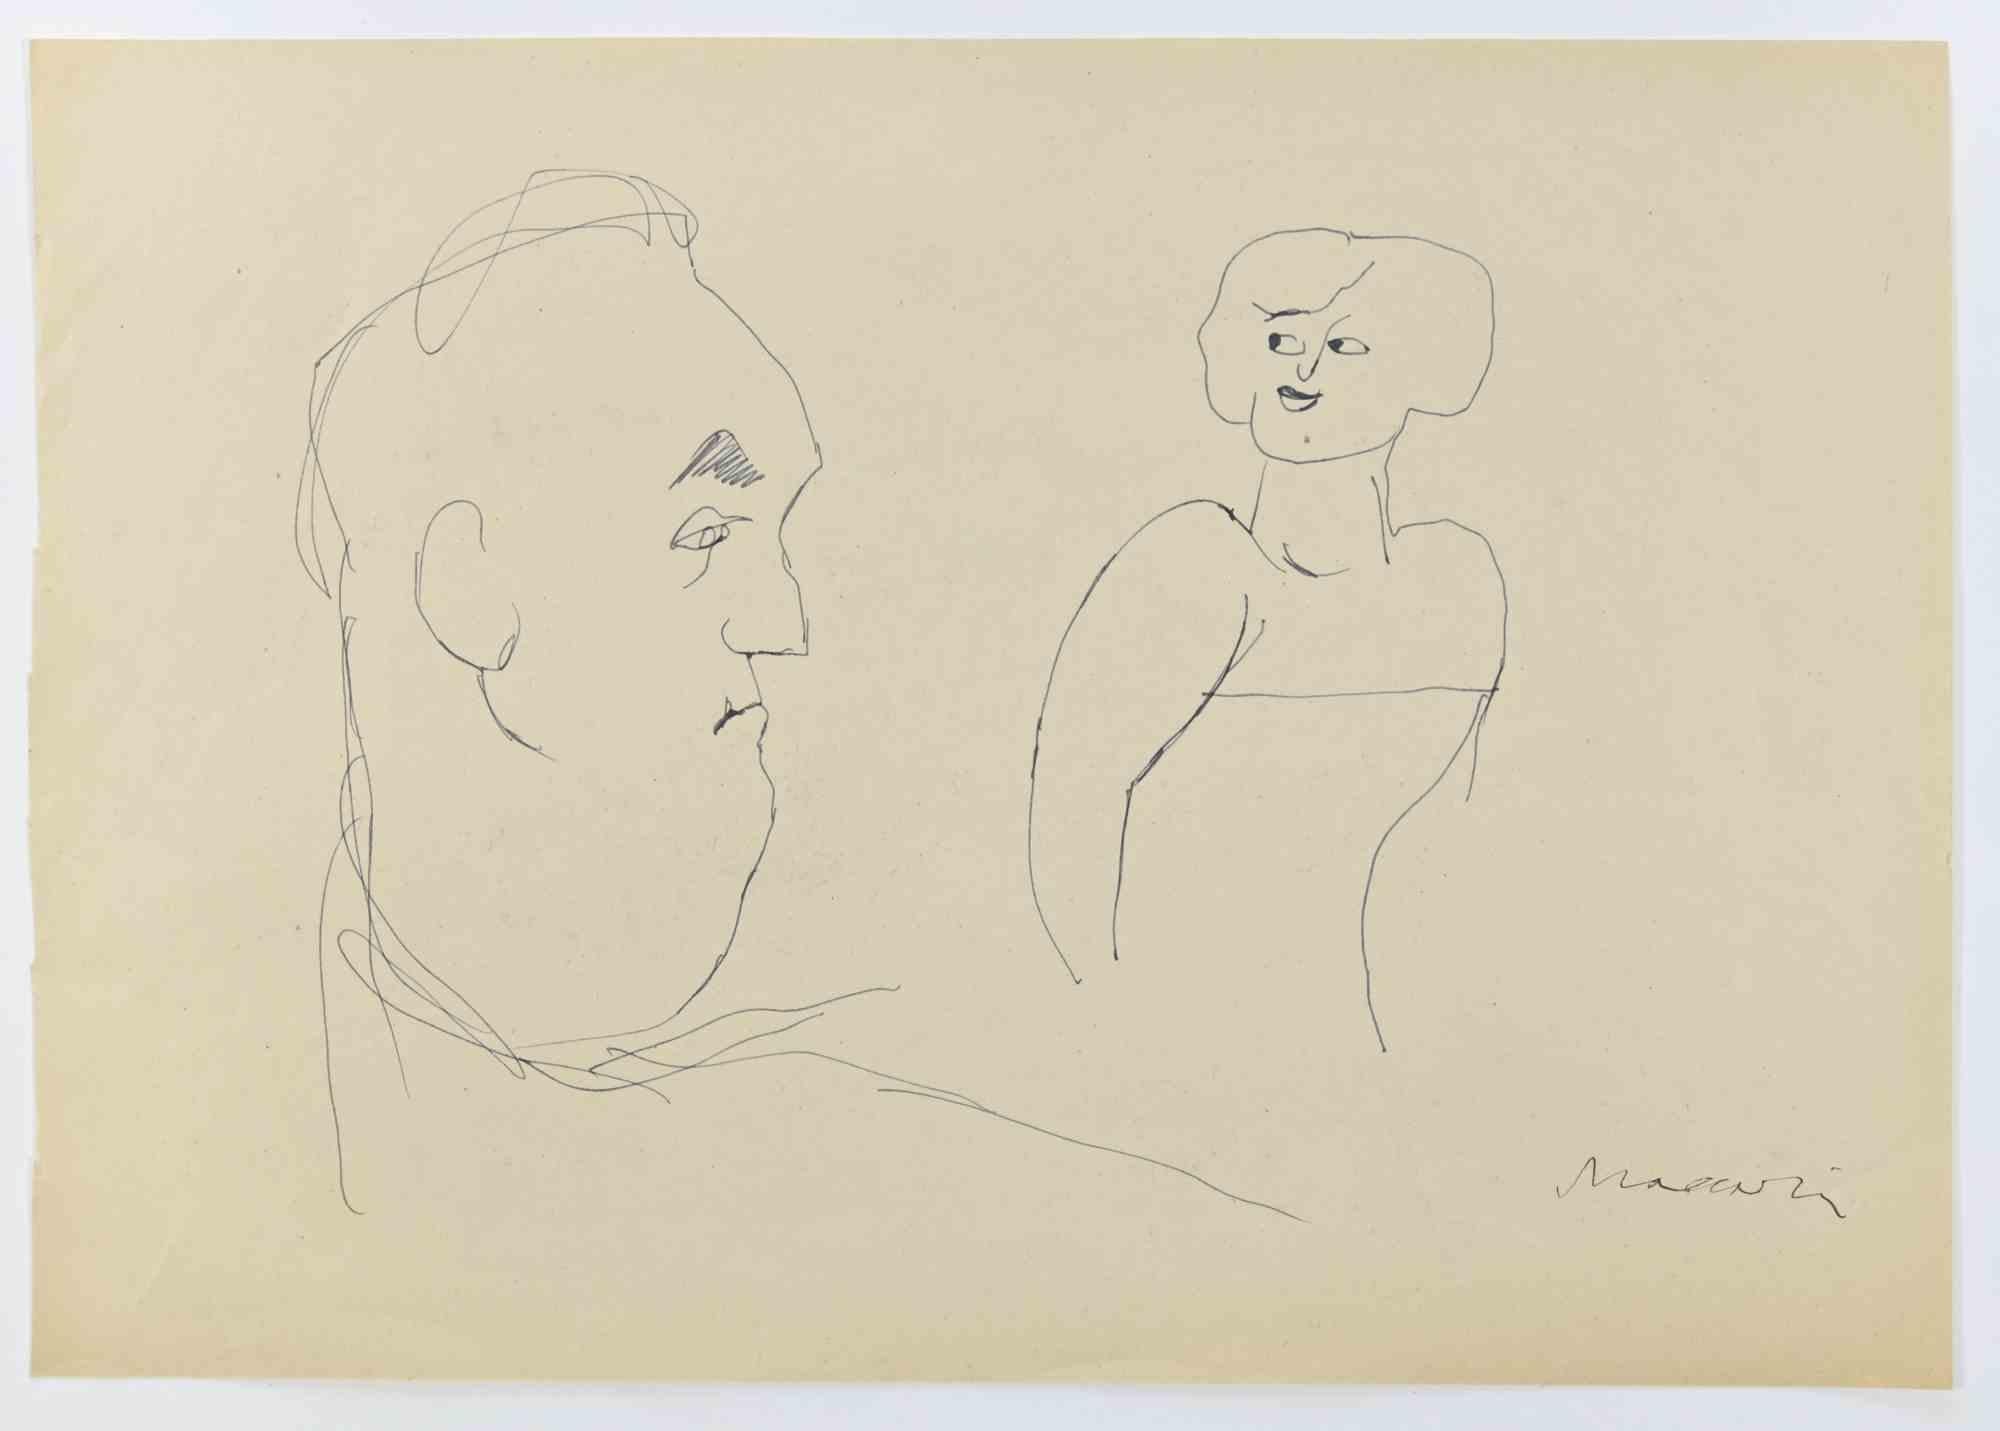 Figures is a Pen Drawing realized by Mino Maccari  (1924-1989) in the 1960s.

Hand-signed on the lower.

Good condition.

Mino Maccari (Siena, 1924-Rome, June 16, 1989) was an Italian writer, painter, engraver and journalist, winner of the